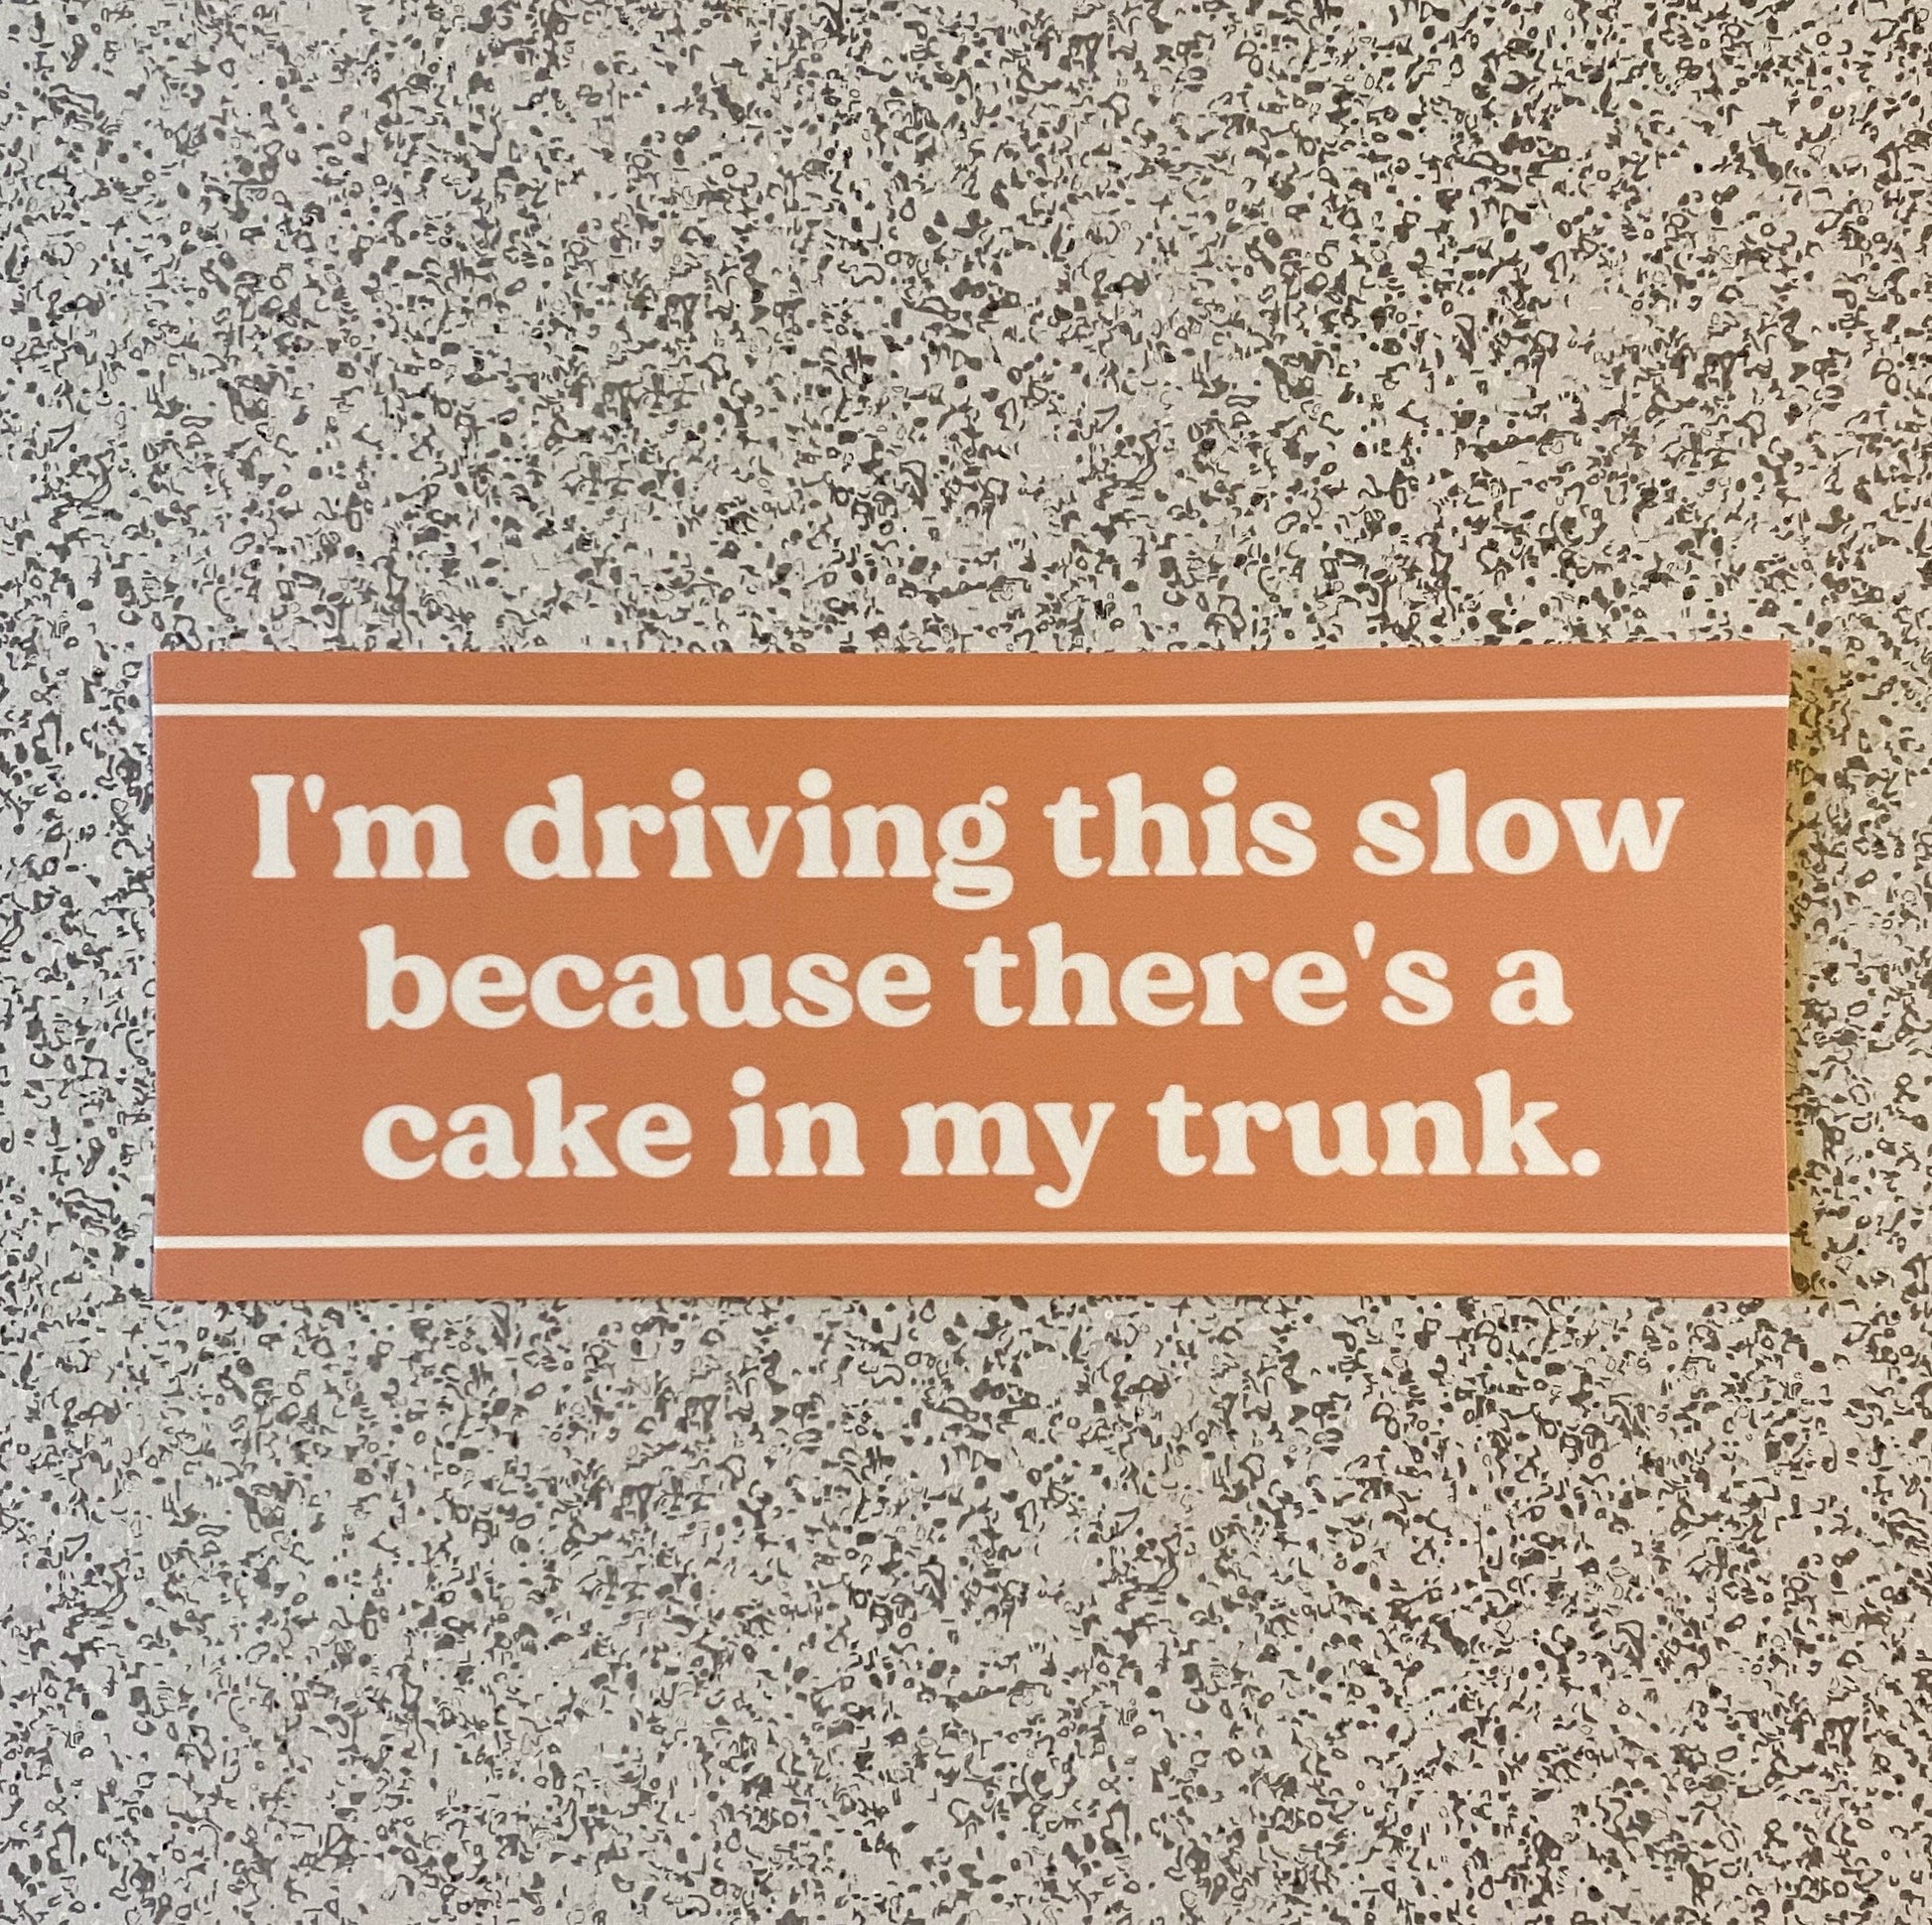 A funny orange bumper sticker with the words "I'm driving this slow because there's a cake in my trunk" in white